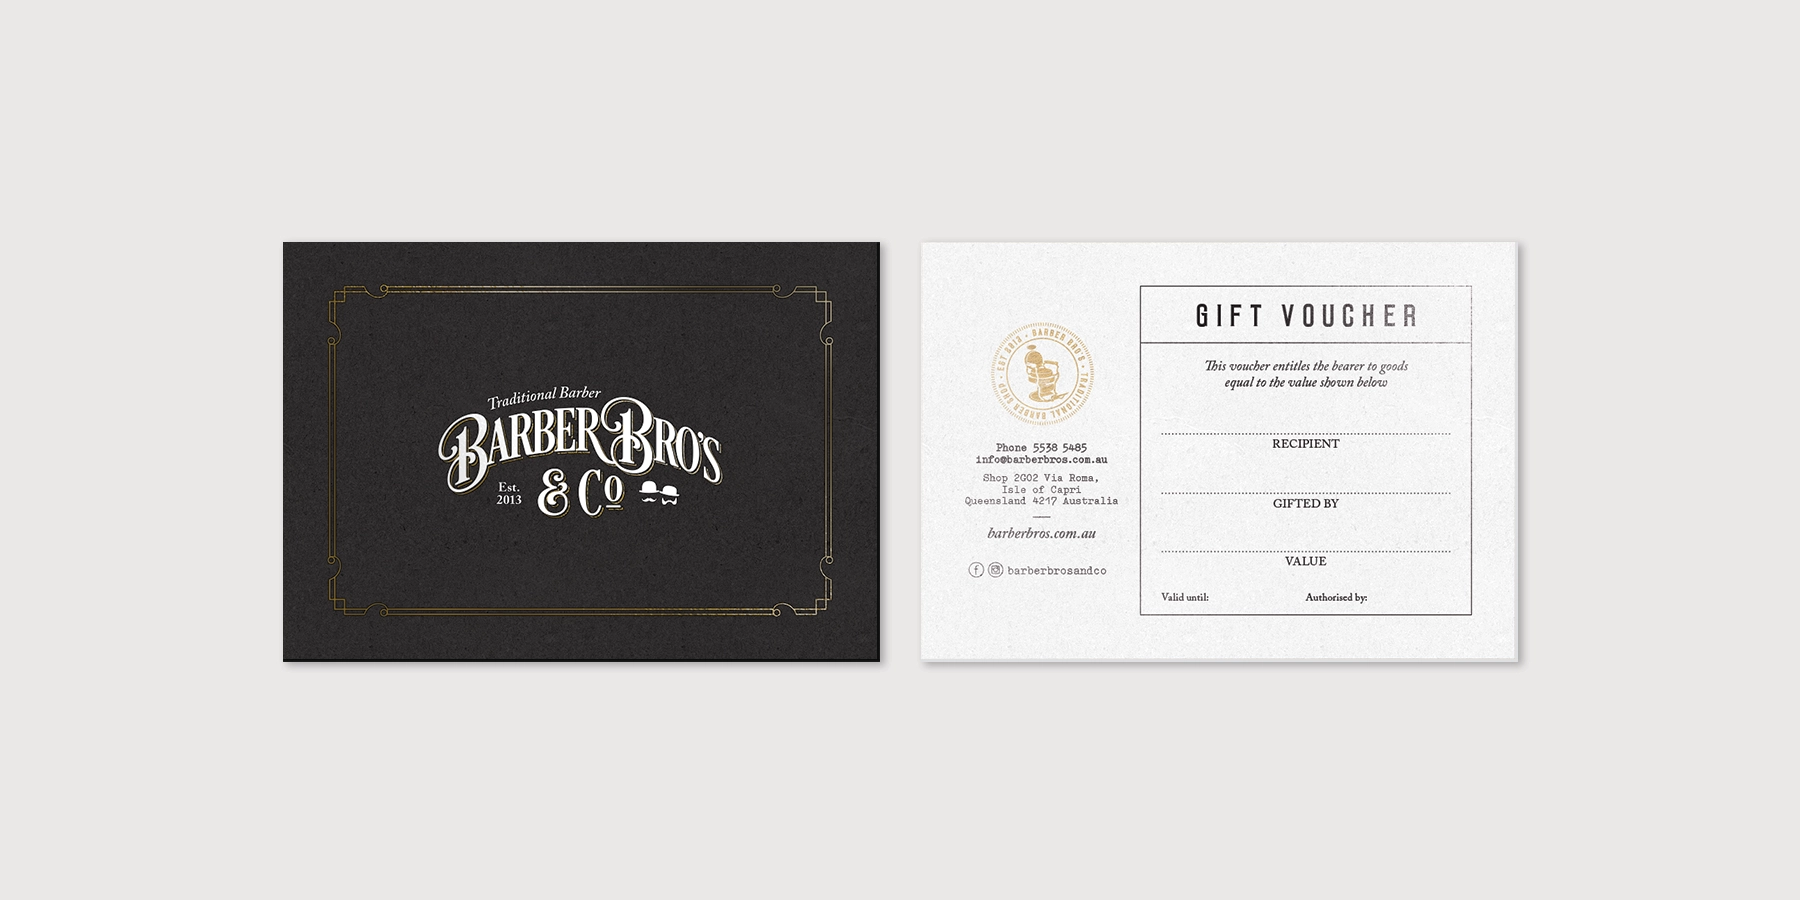 Barber Bros & Co gift card and print design by Kaliber Studio